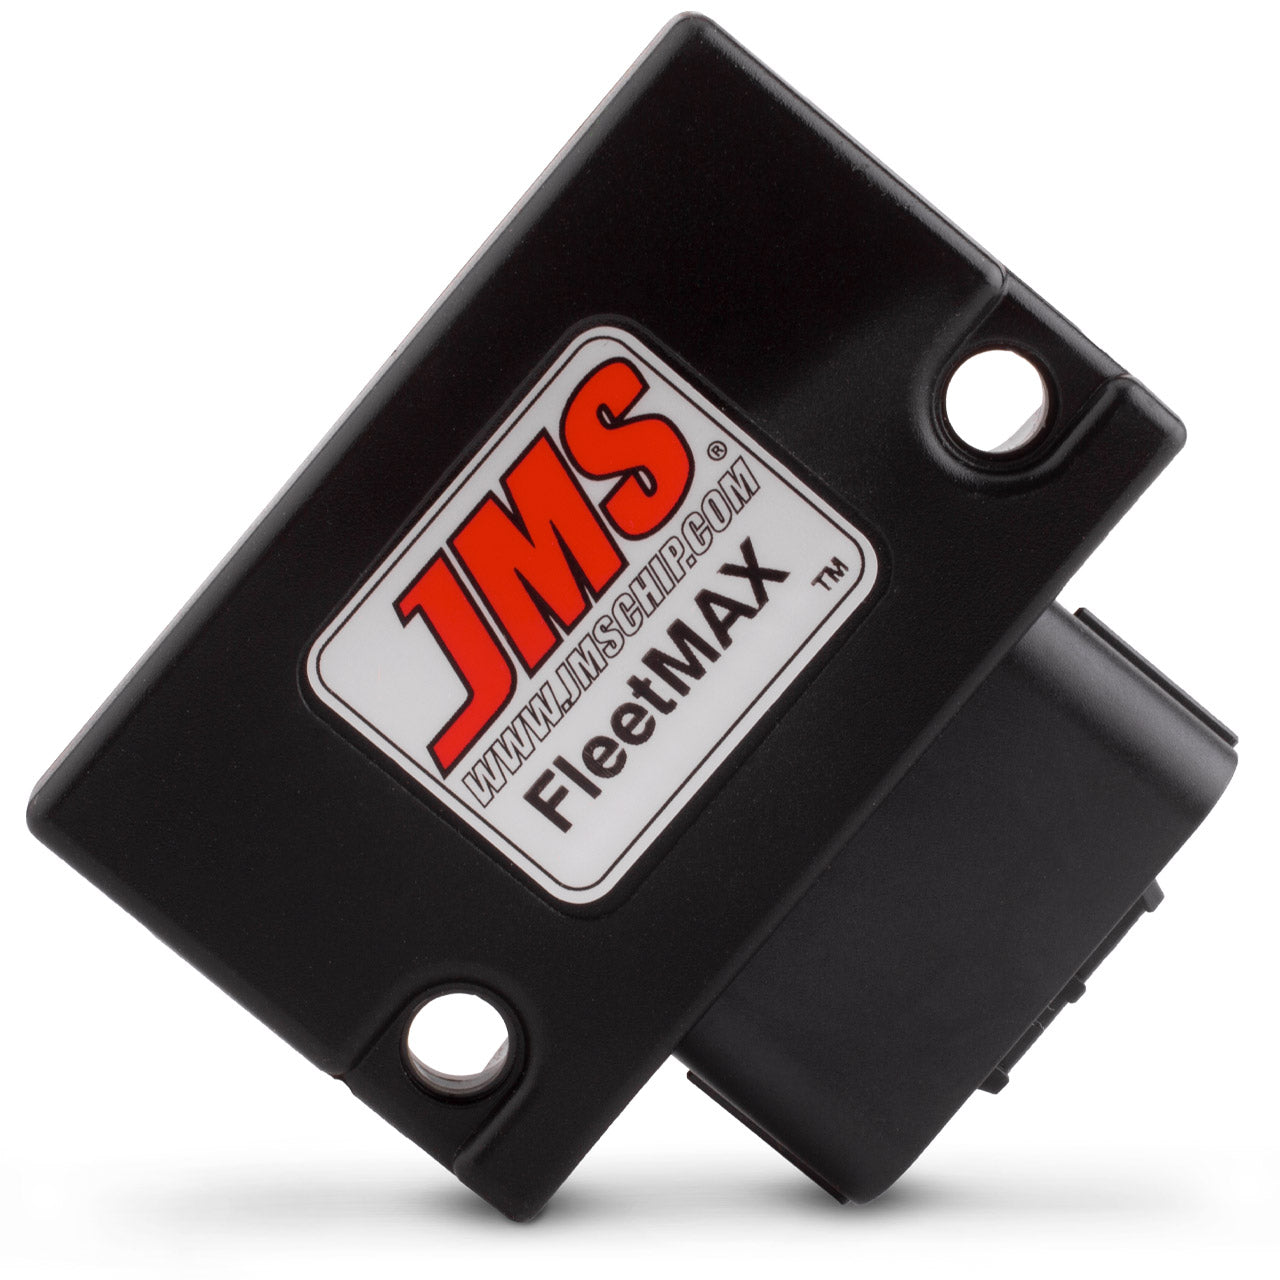 JMS FleetMAX Speed Control Device. Plug and Play for 2014 - 2021 Toyota Vehicles with electronic throttle control FX71718TYV3